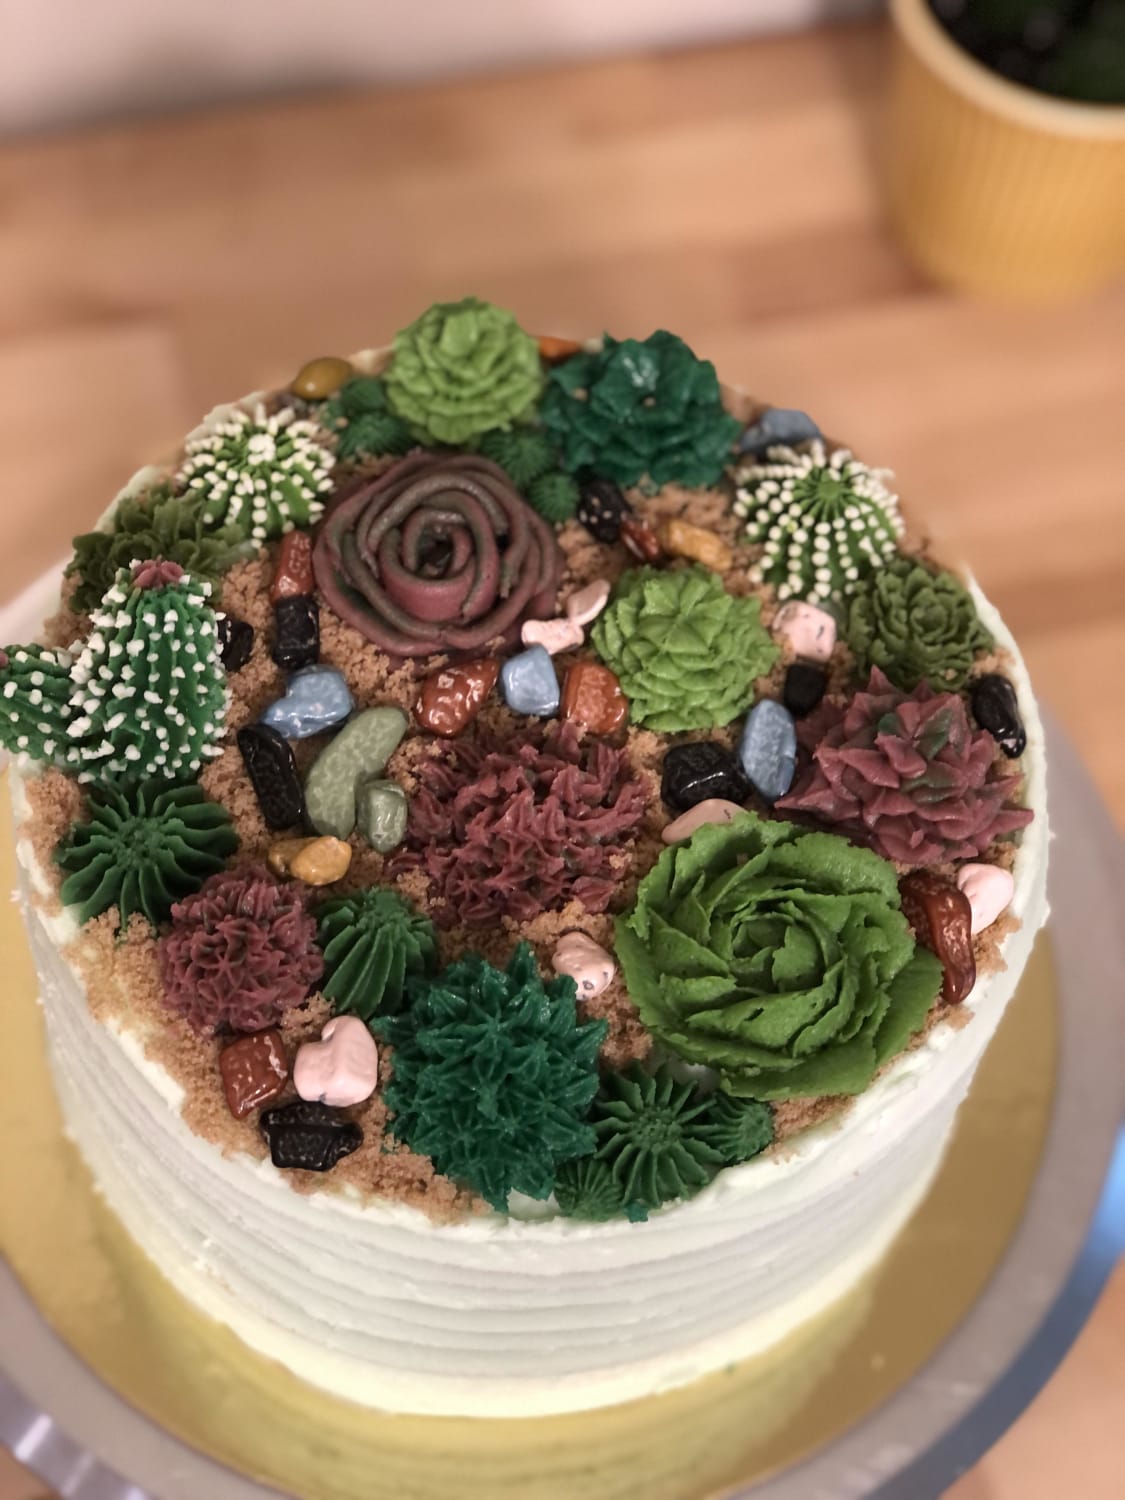 First time making buttercream succulents and cacti’s, brown sugar cake with pecan filling